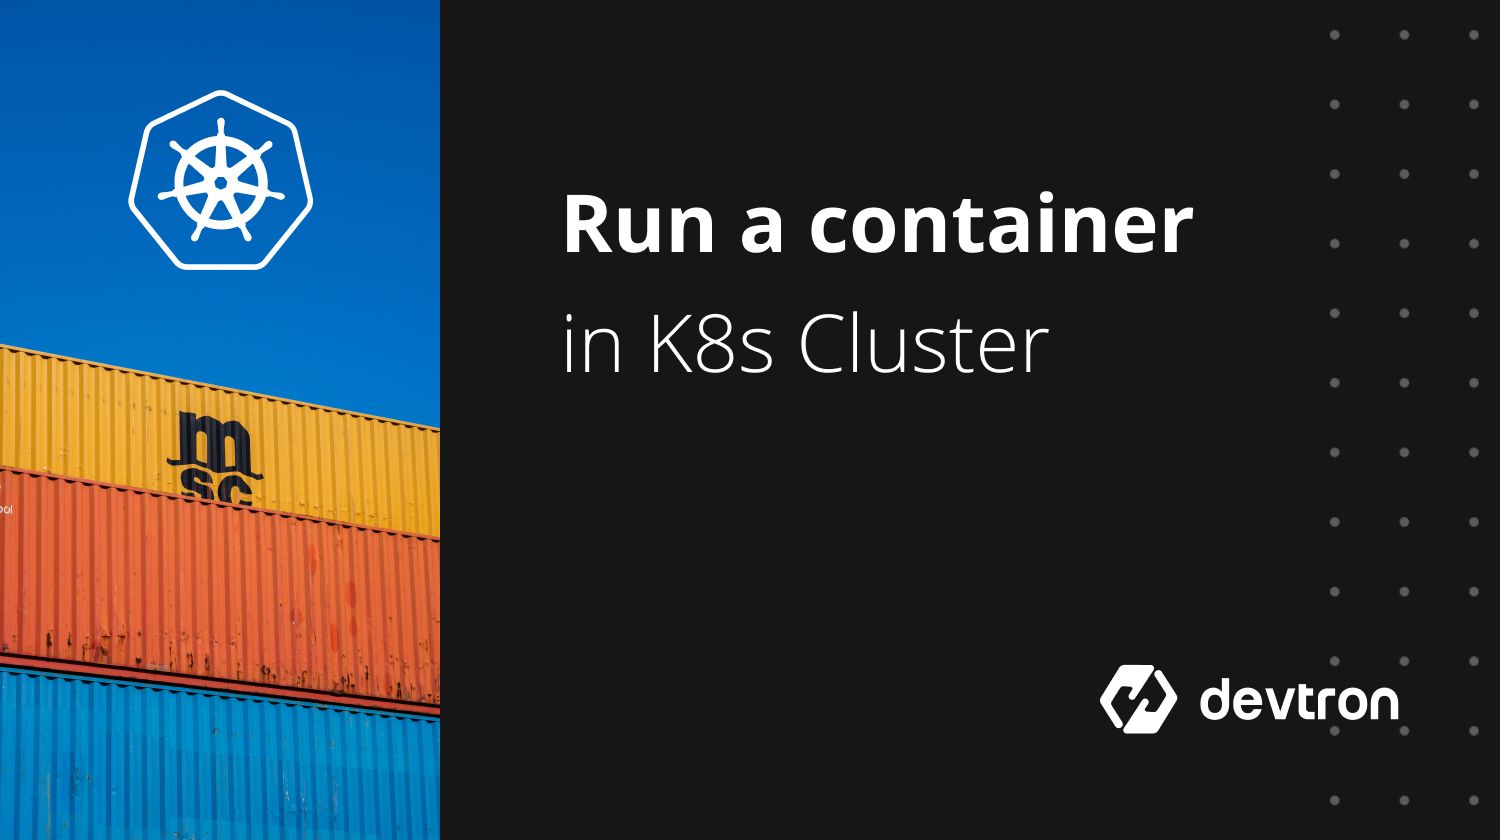 Run A Container In Kubernetes Cluster Using Devtron’s CI/CD Tool